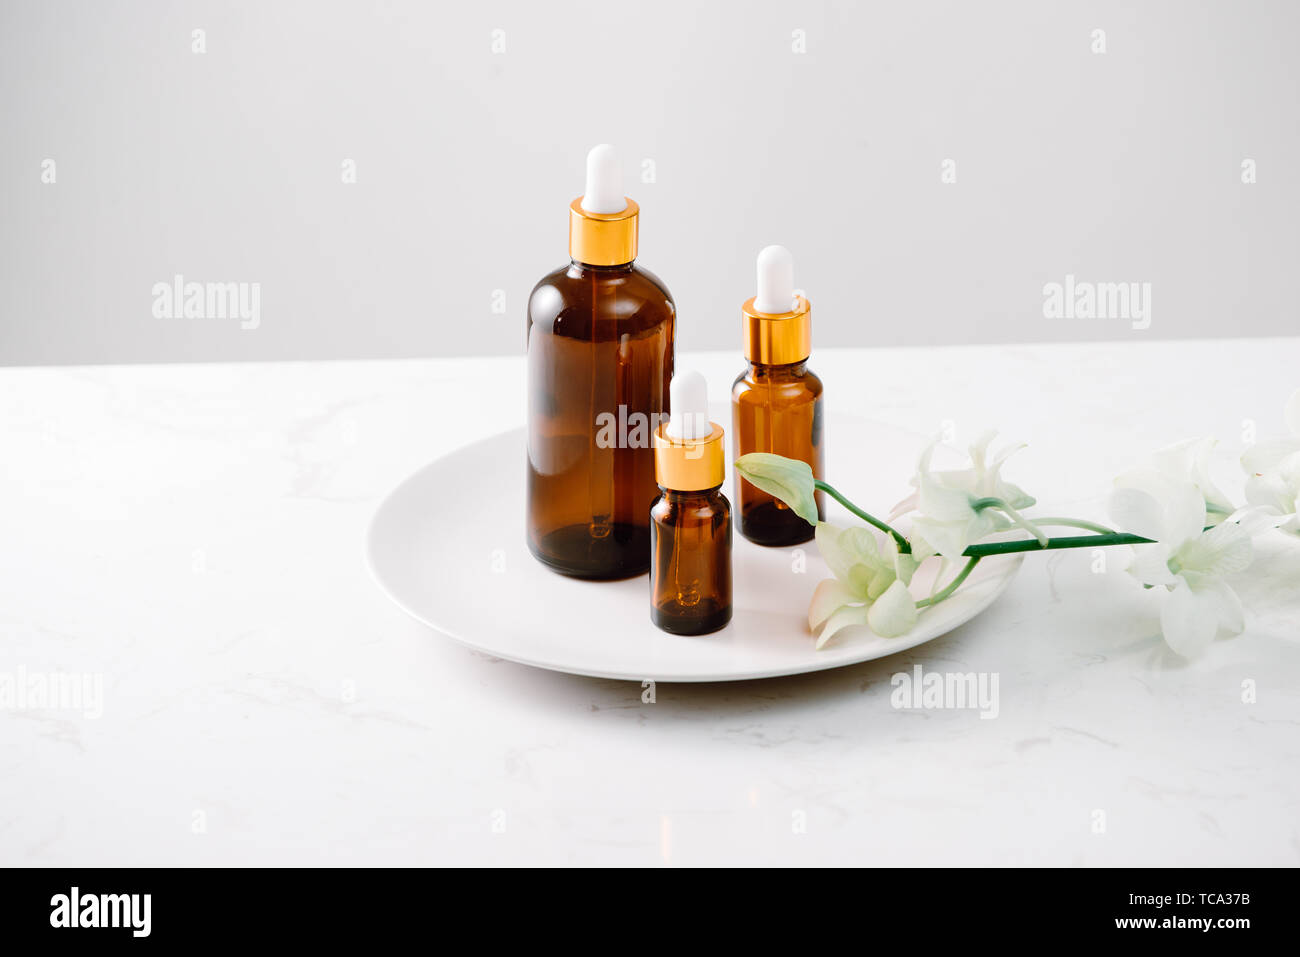 Dropper bottle of organic orchid pure oil on a white surface with orchid heads in the background. Stock Photo